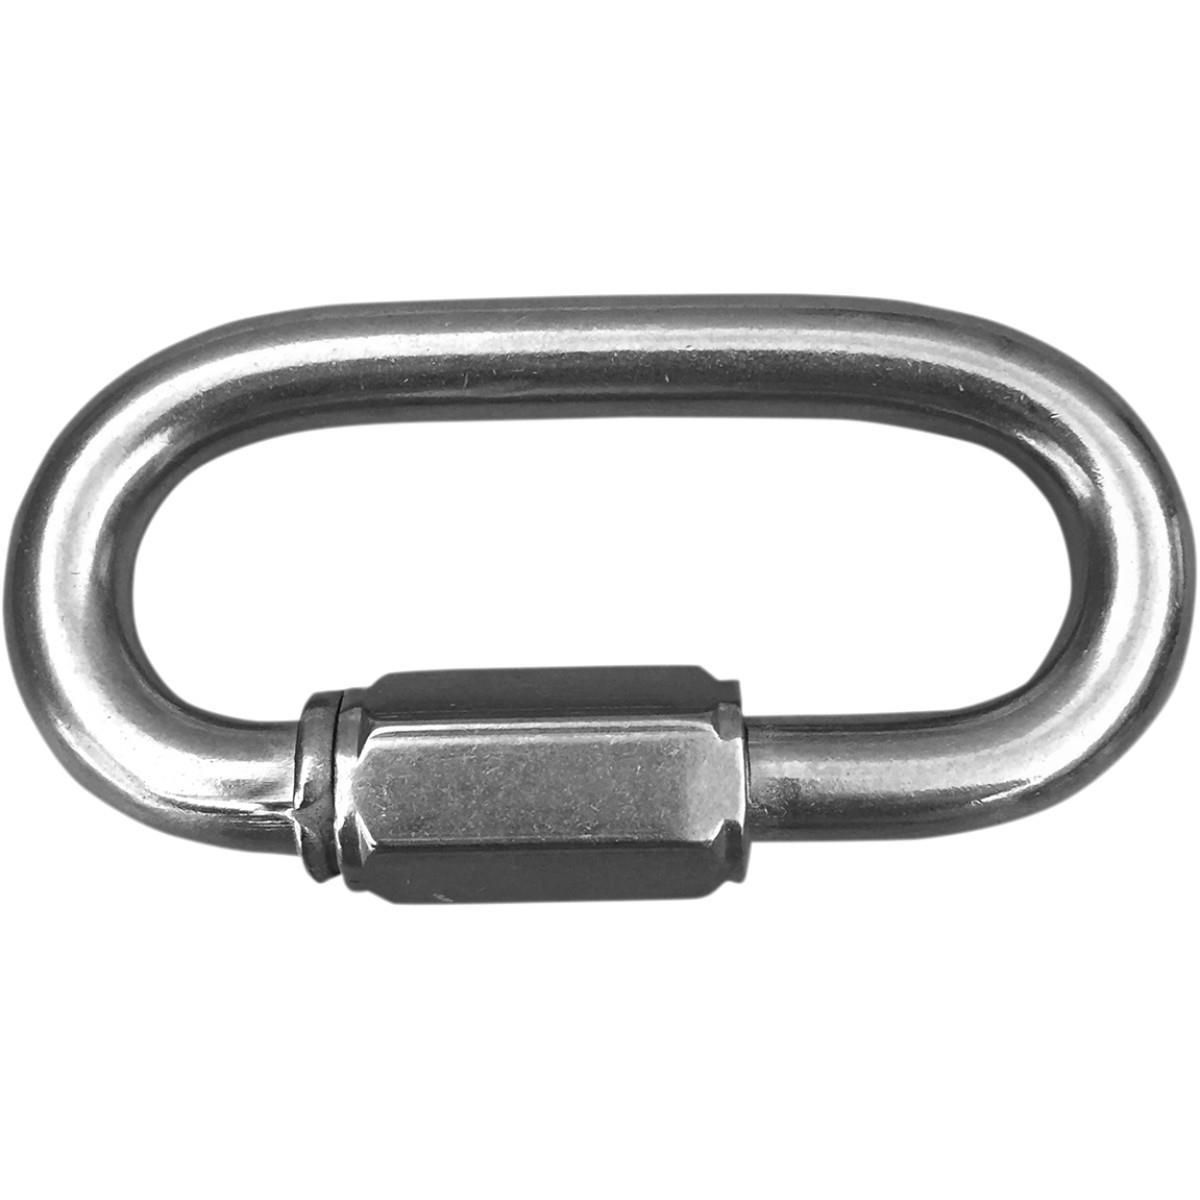 2E8J-PARTS-UNLIM-24040657 Stainless Steel Quick Link - 5/16in. x 2-5/16in.